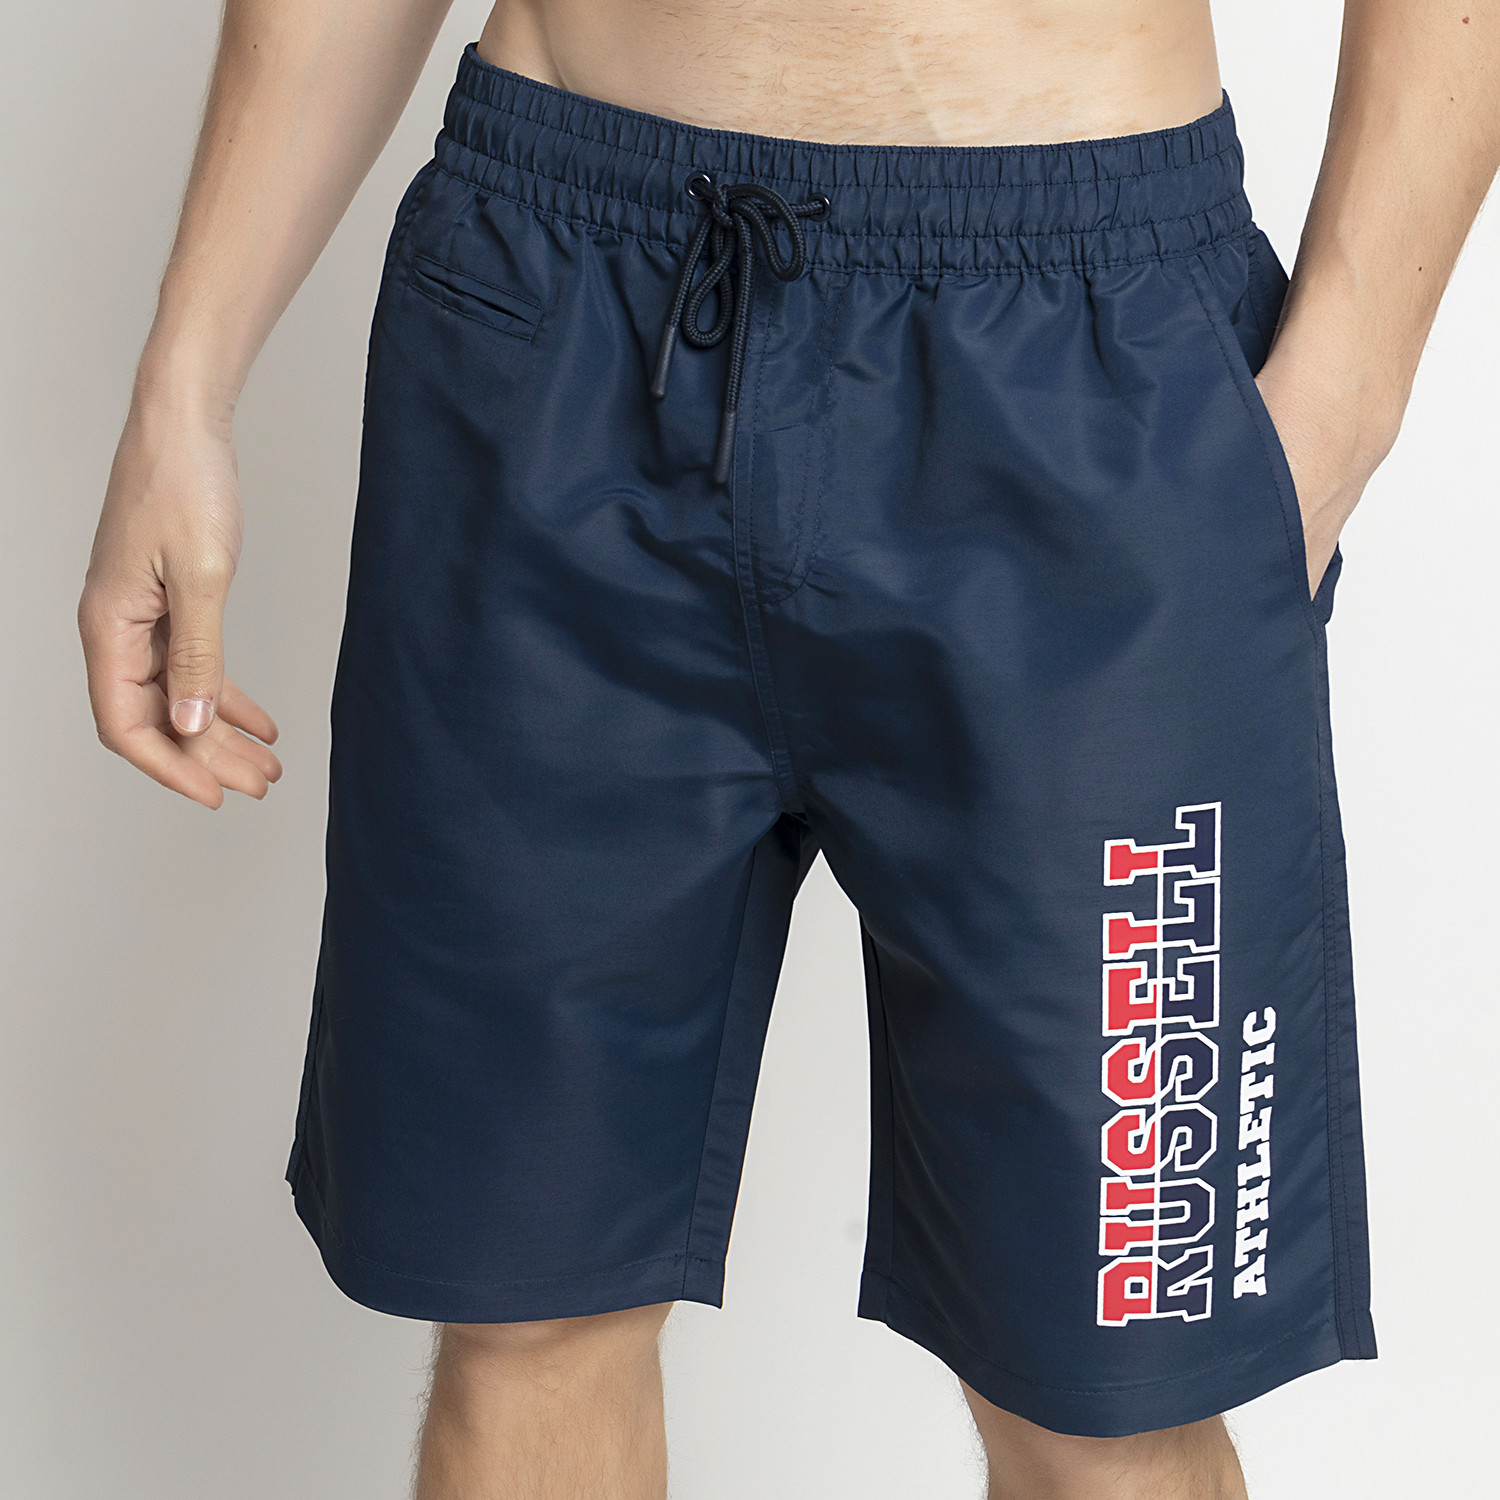 Russell Russell Shorts Ανδρικό Μαγιό (9000076020_26912)